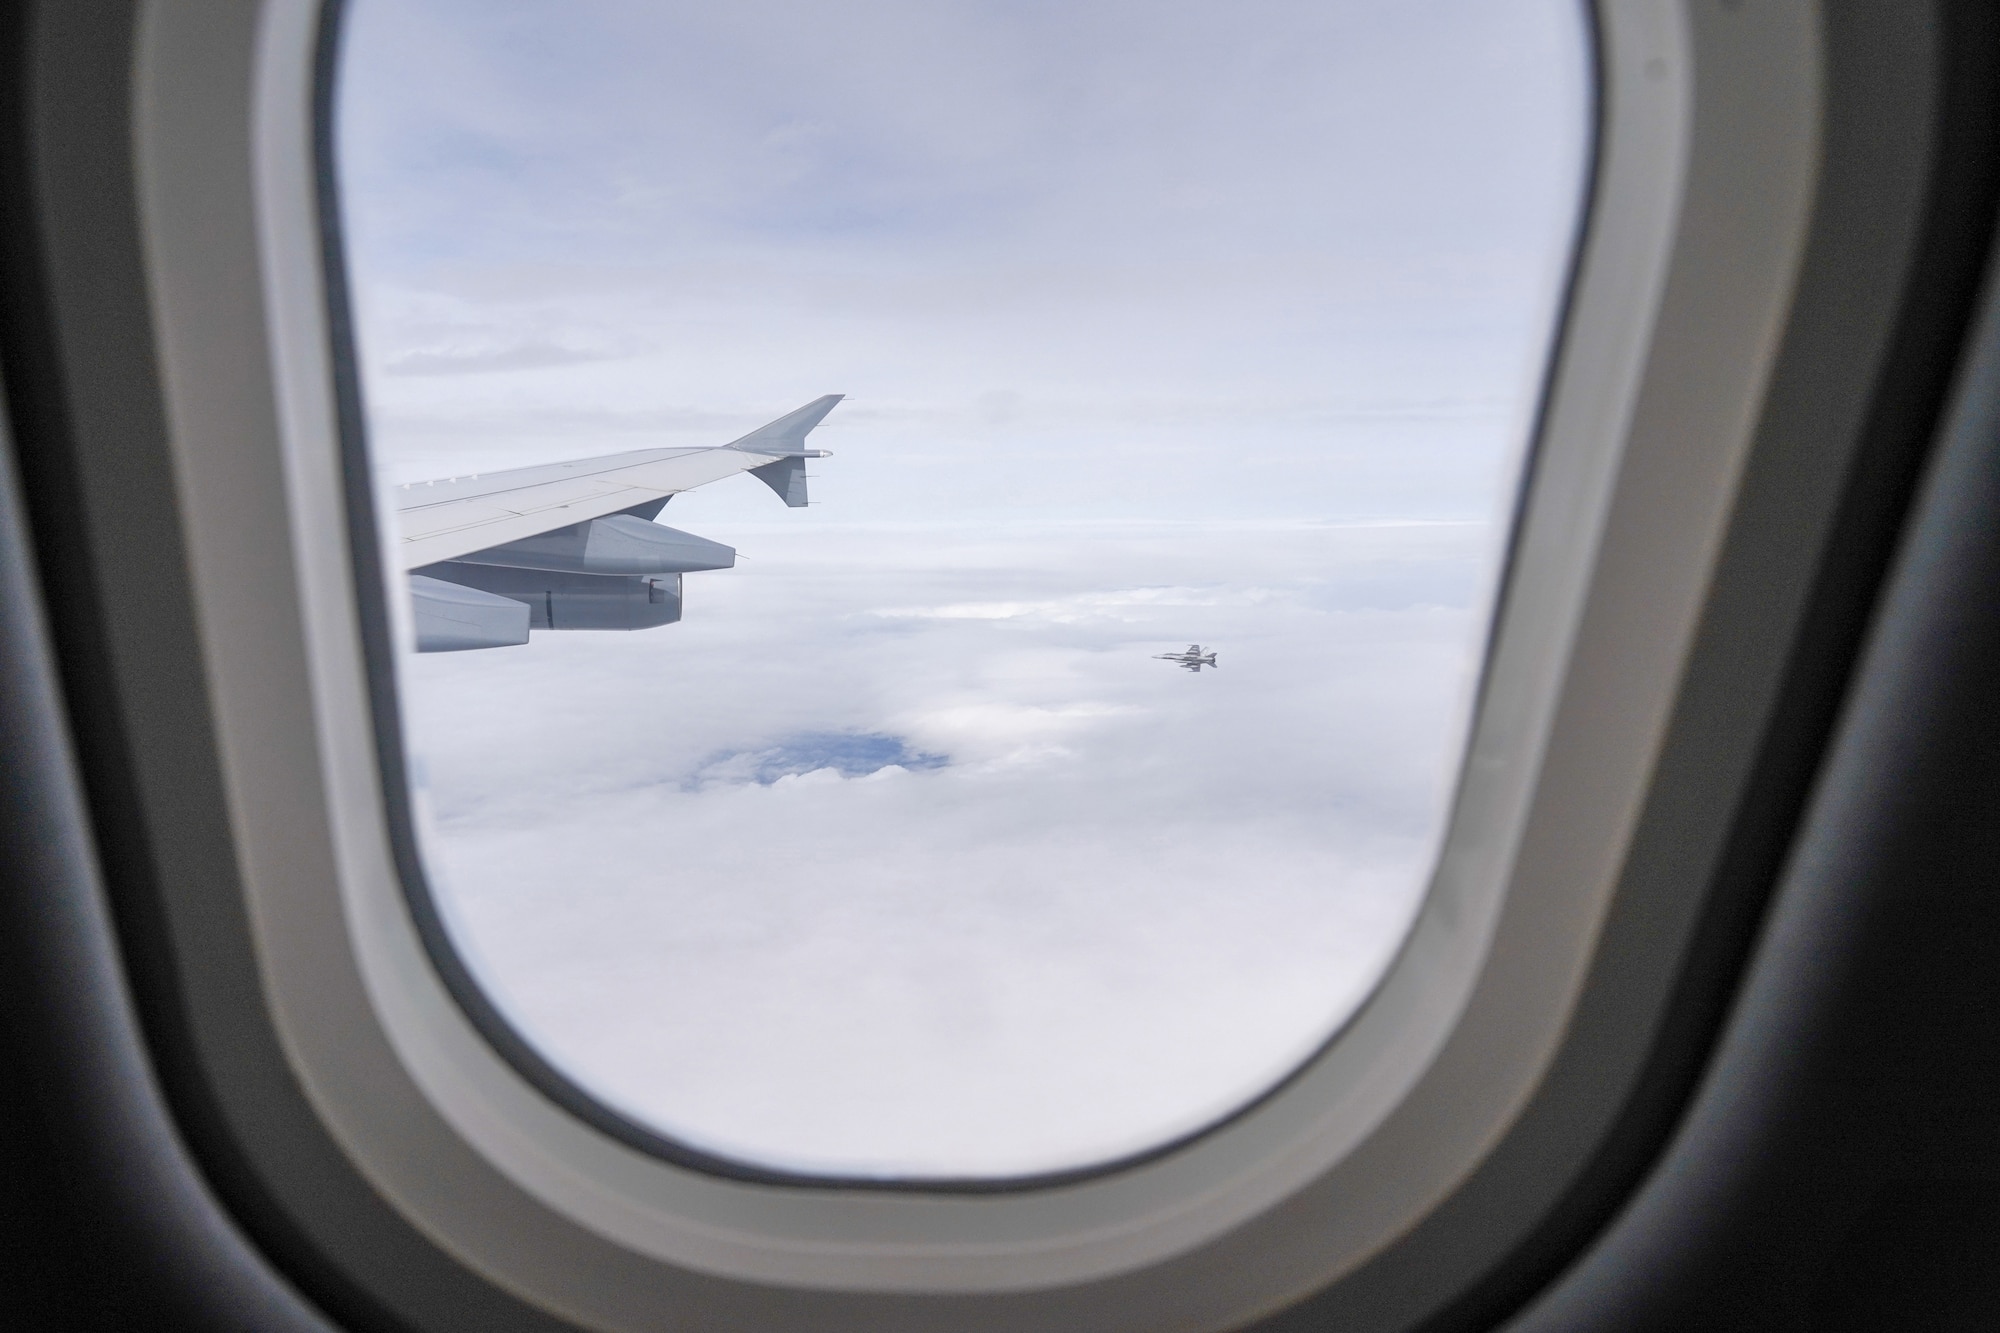 A Royal Canadian Air Force CF-18 Hornet peels away from a CC-150 Polaris refueling tanker as RCAF Airmen assigned to the 437th Transport Squadron based out of Canadian Forces Base Trenton, Canada, perform refueling operations in training airspace over Alaska during the Red Flag-Alaska 19-3 exercise, Aug. 15, 2019. Red Flag-Alaska, a series of Pacific Air Forces commander-directed field training exercises for U.S. forces, provides joint offensive counter-air, interdiction, close air support, and large force employment training in a simulated combat environment.